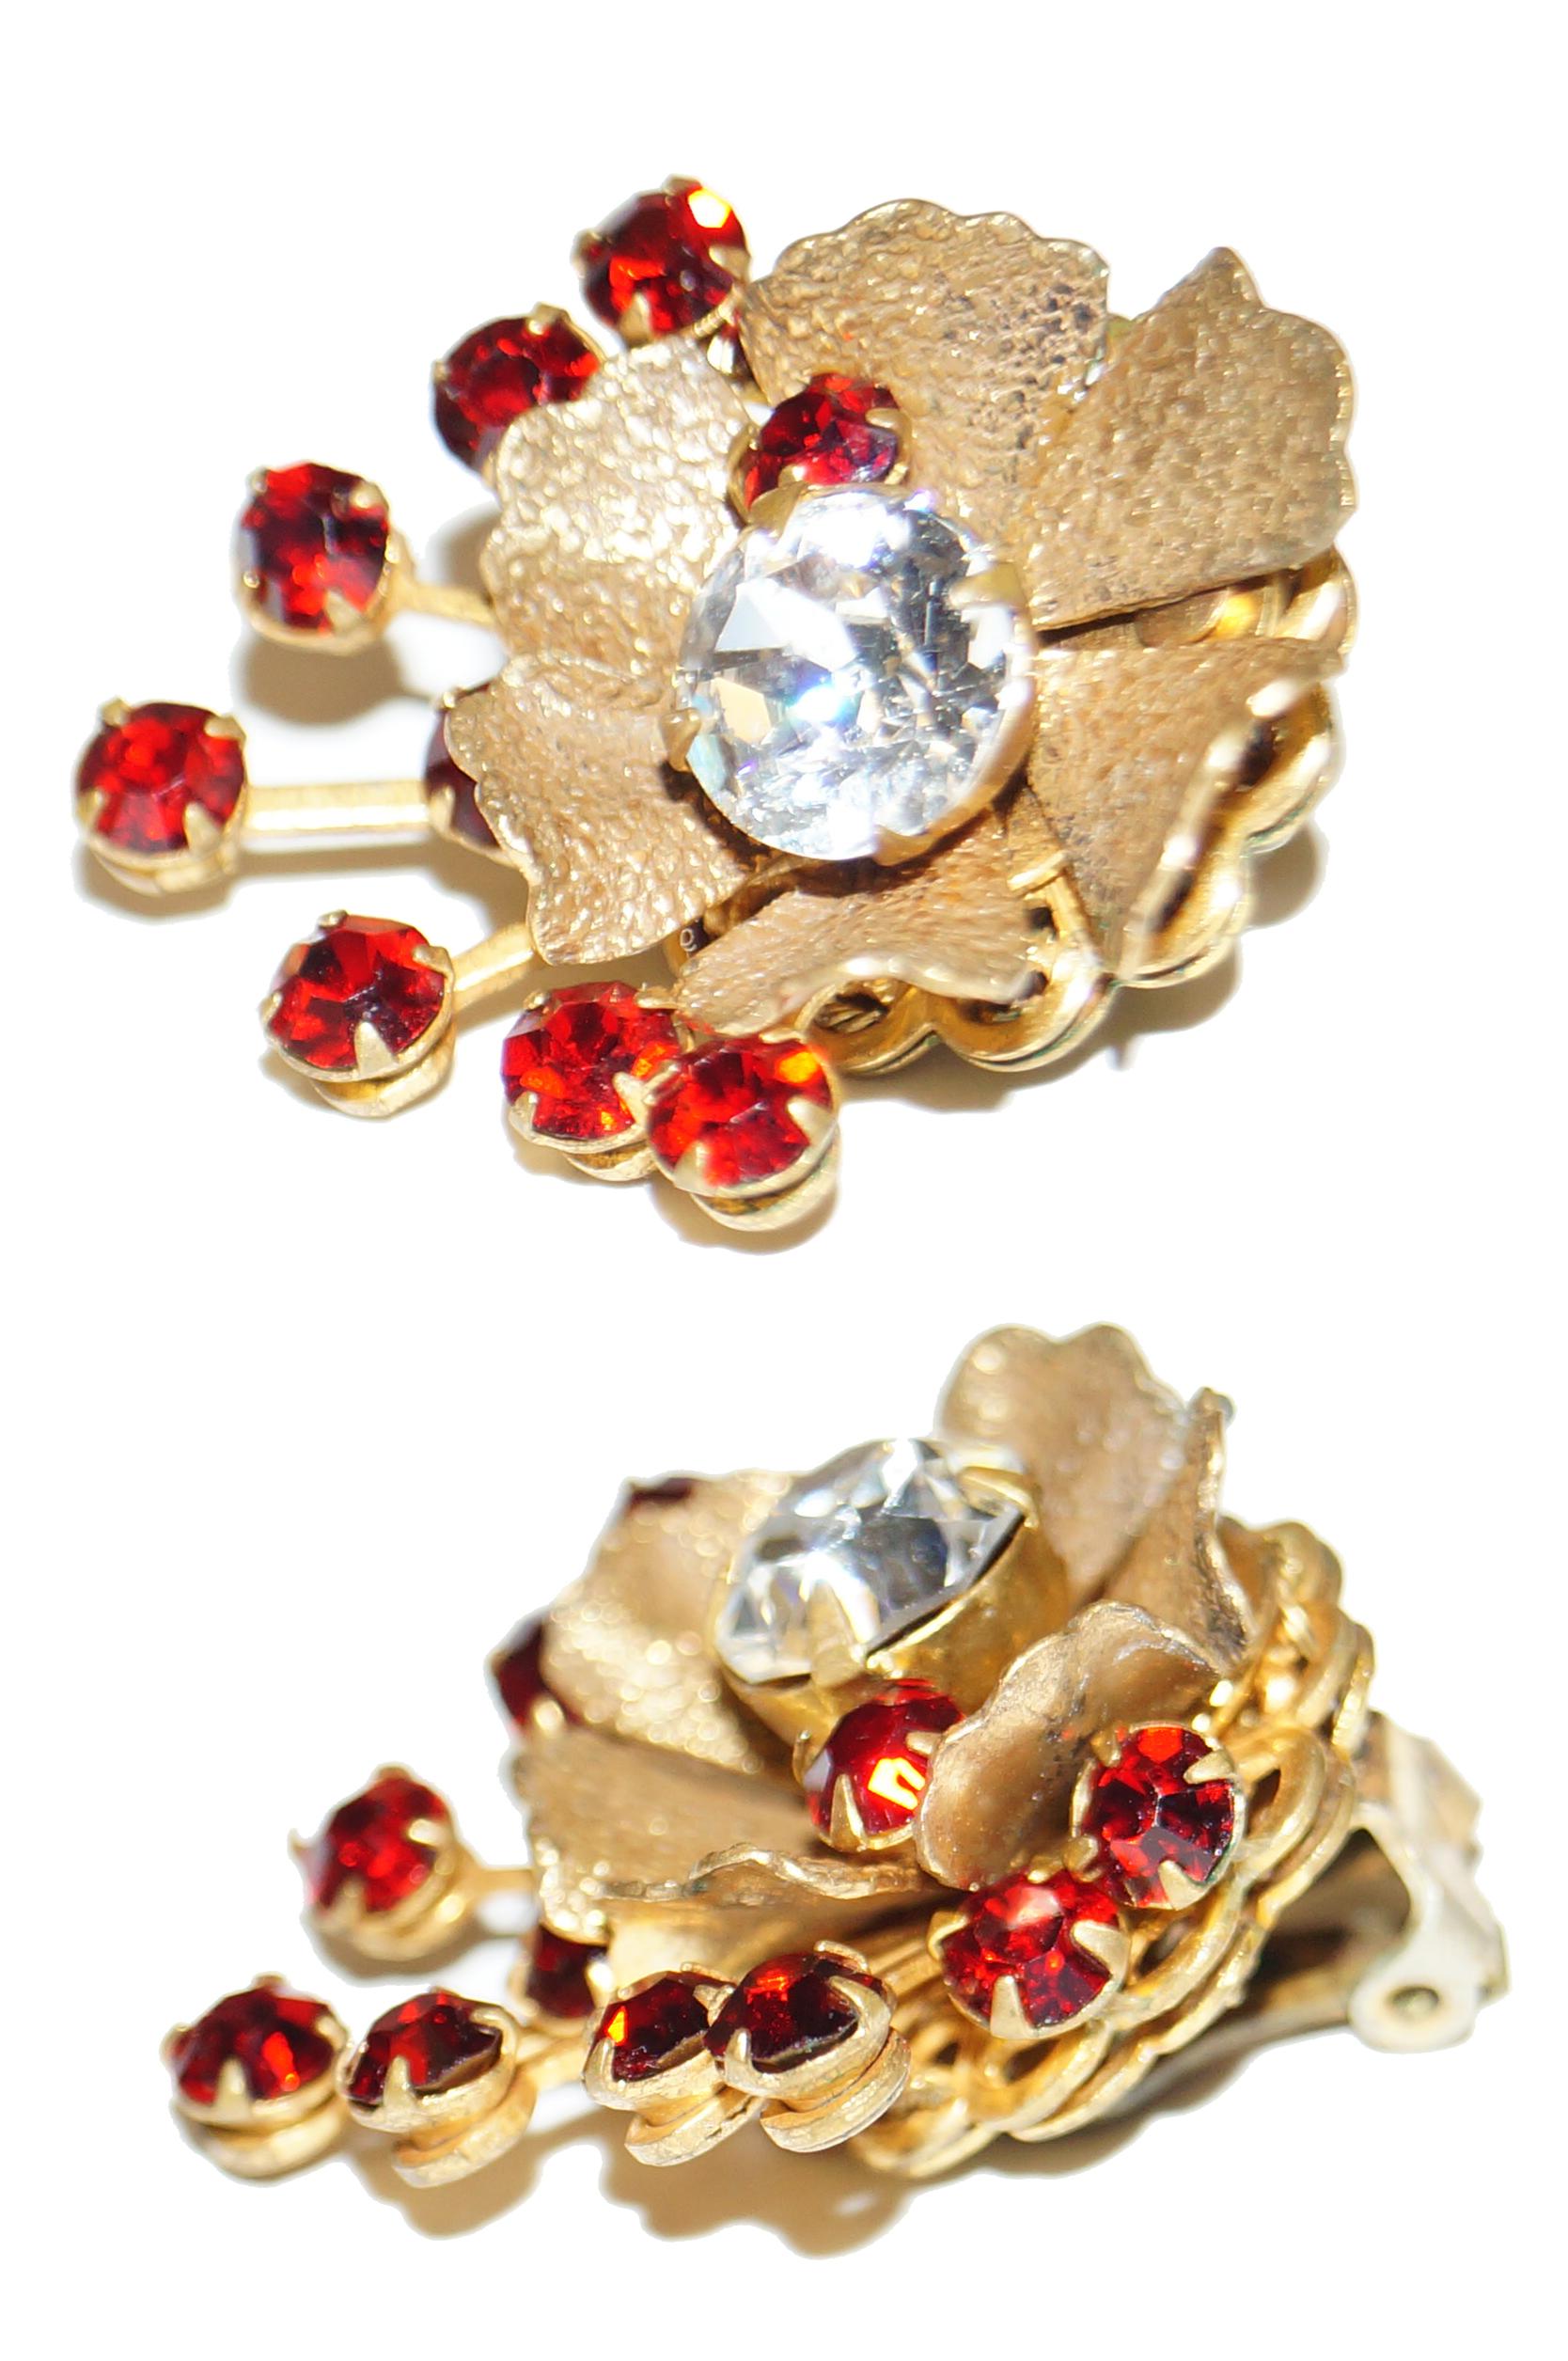 Simple and elegant floral rhinestone earrings by Miriam Haskell. The earrings are composed of a brilliant large silver rhinestone center with smaller red rhinestone accent, a gold tone floral body with lightly textured petals, and a spray of red